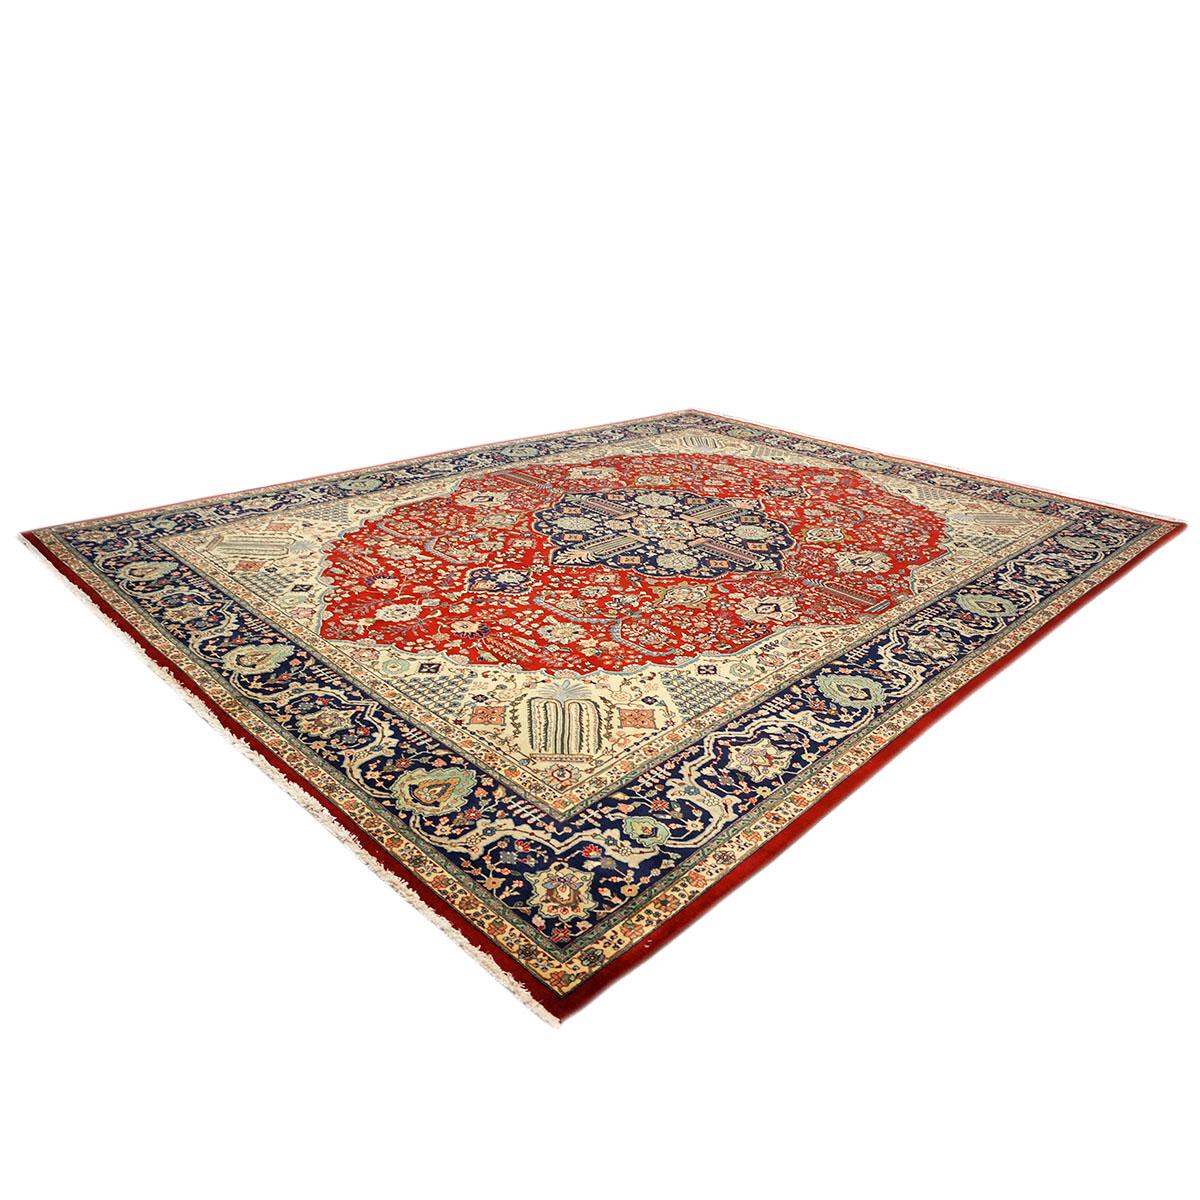 1930s Antique Persian Tabriz 9x13 Ivory, Red, & Navy Handmade Area Rug In Good Condition For Sale In Houston, TX